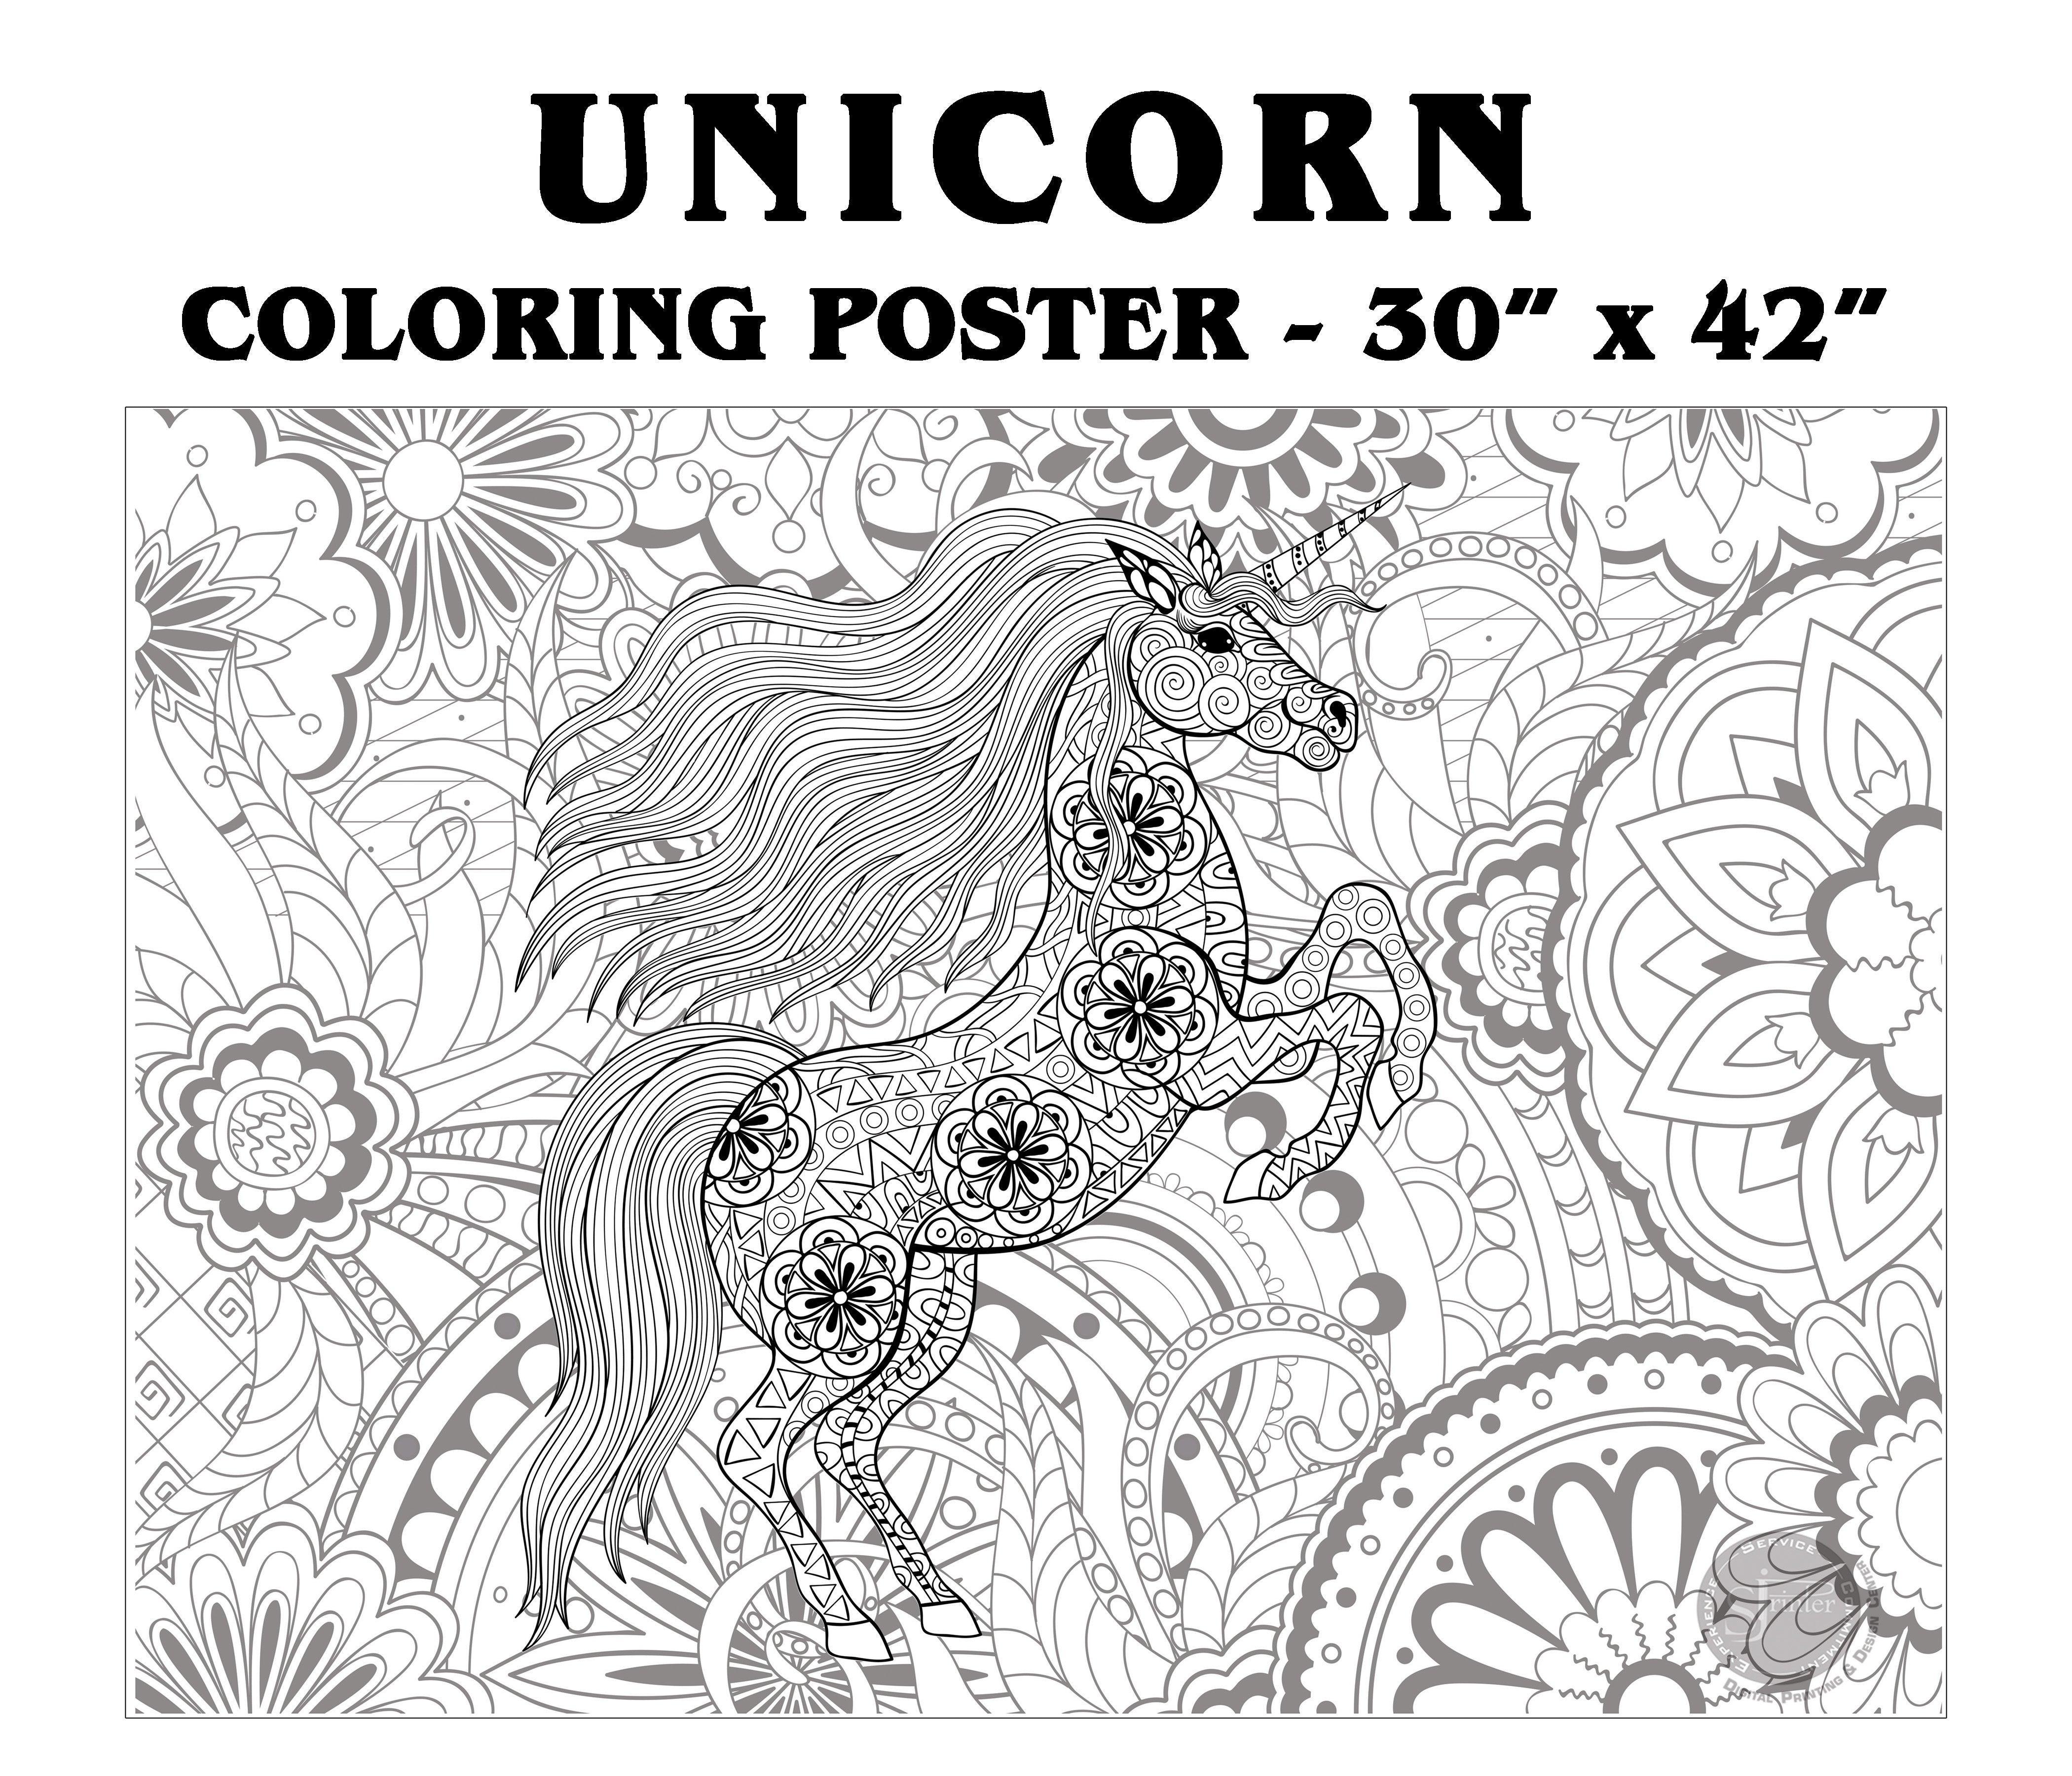 Purchase Welcome coloring poster at SJPrinter Store